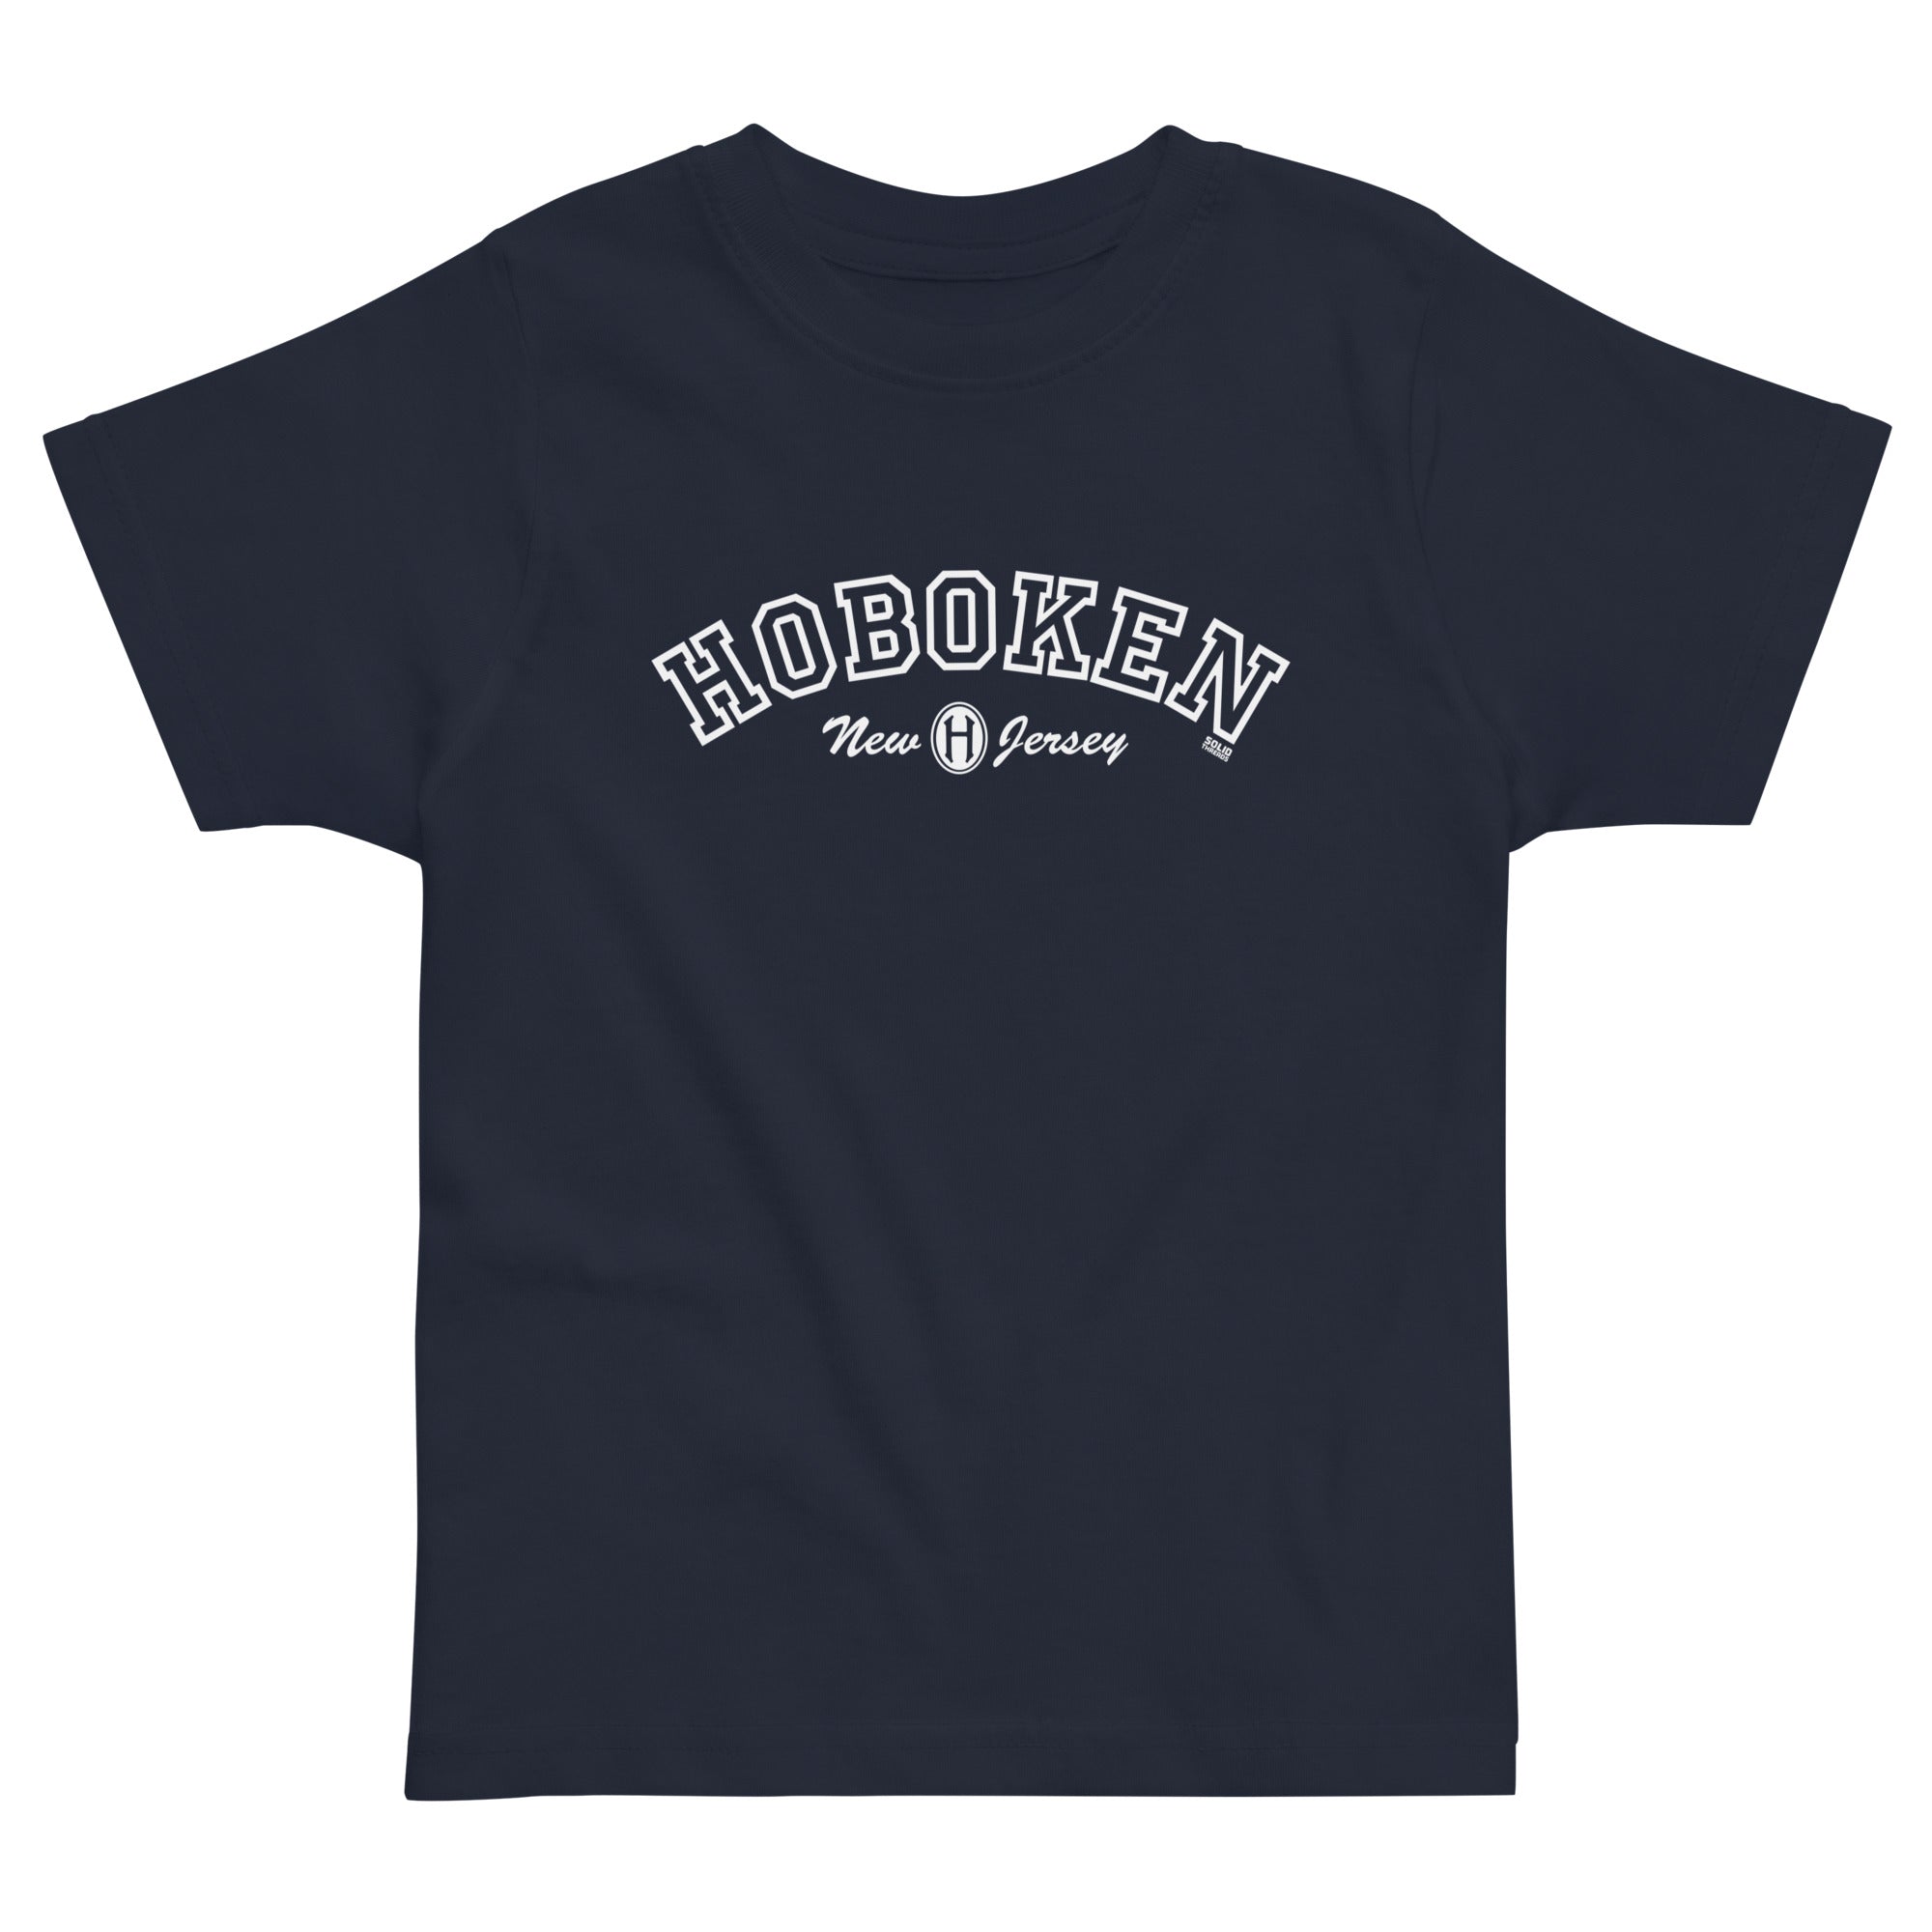 Toddler's Hoboken Collegiate Cool Extra Soft T-Shirt | Retro New Jersey Tee | Solid Threads